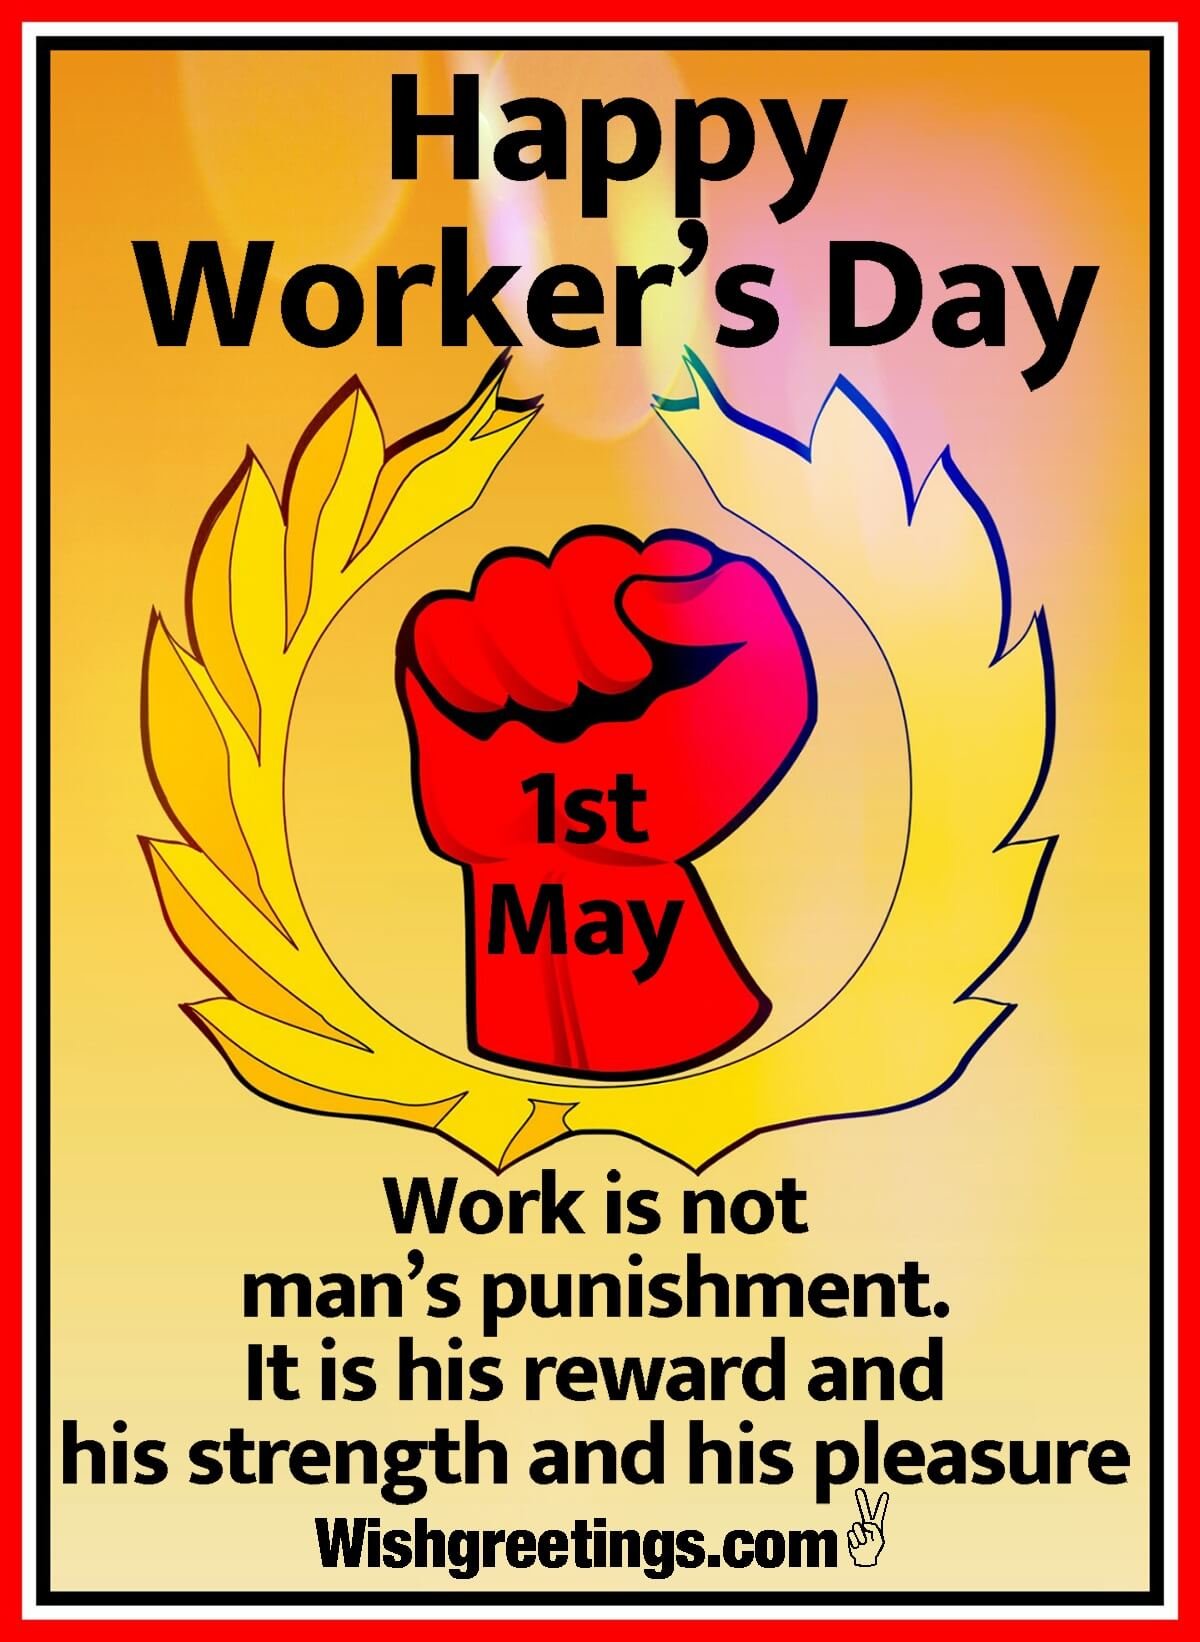 Happy International Workers Day Images Wish Greetings 5997